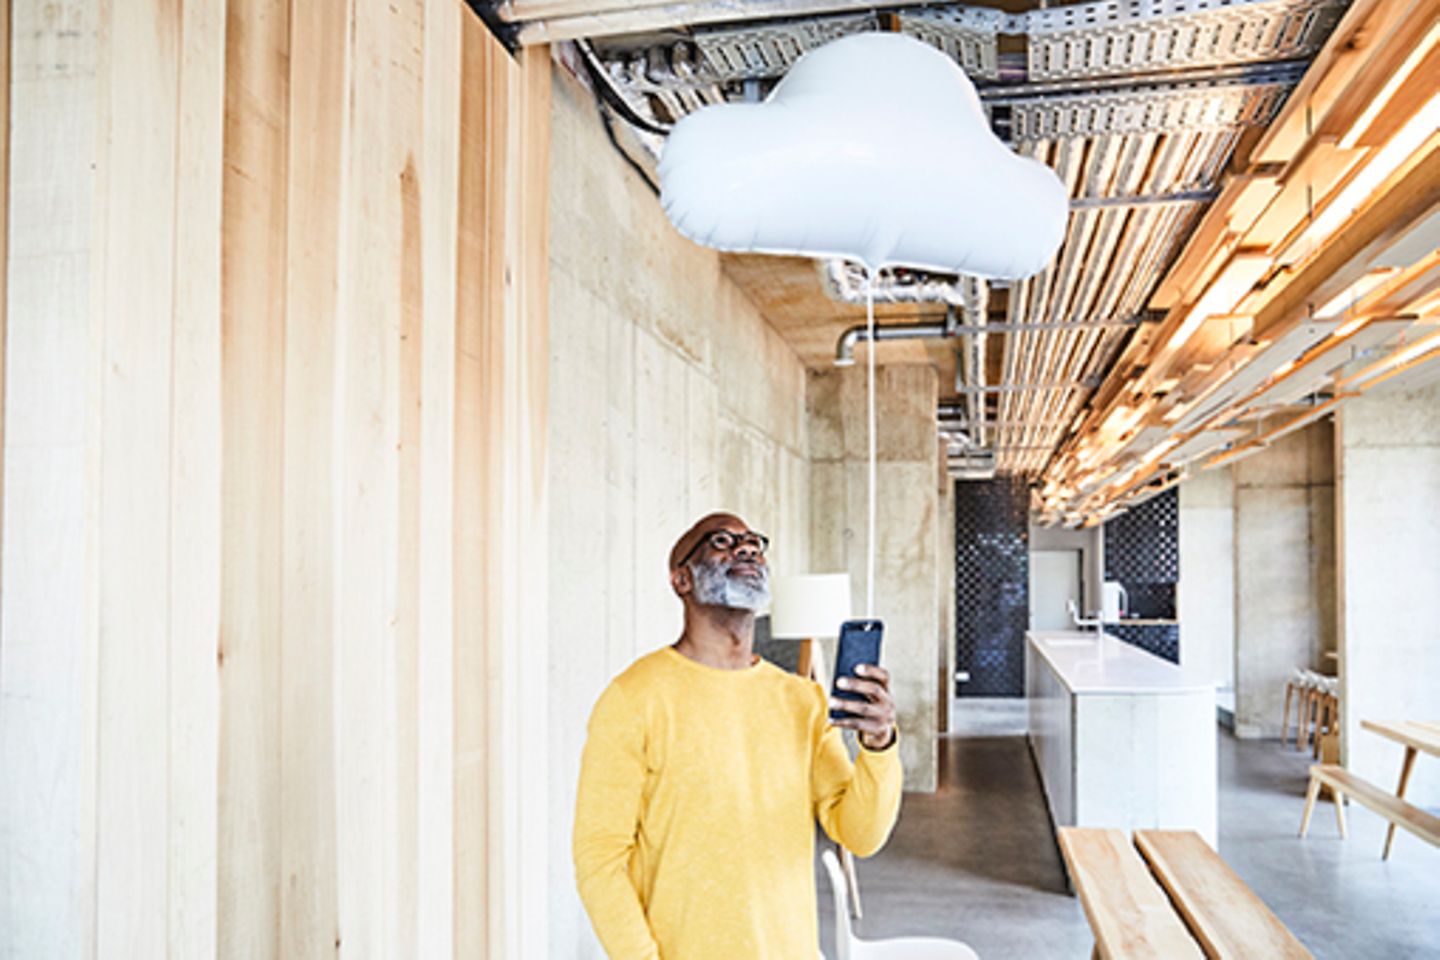 Image of a man in a modern building holding a smartphone with a gas balloon in the shape of a cloud attached to it.